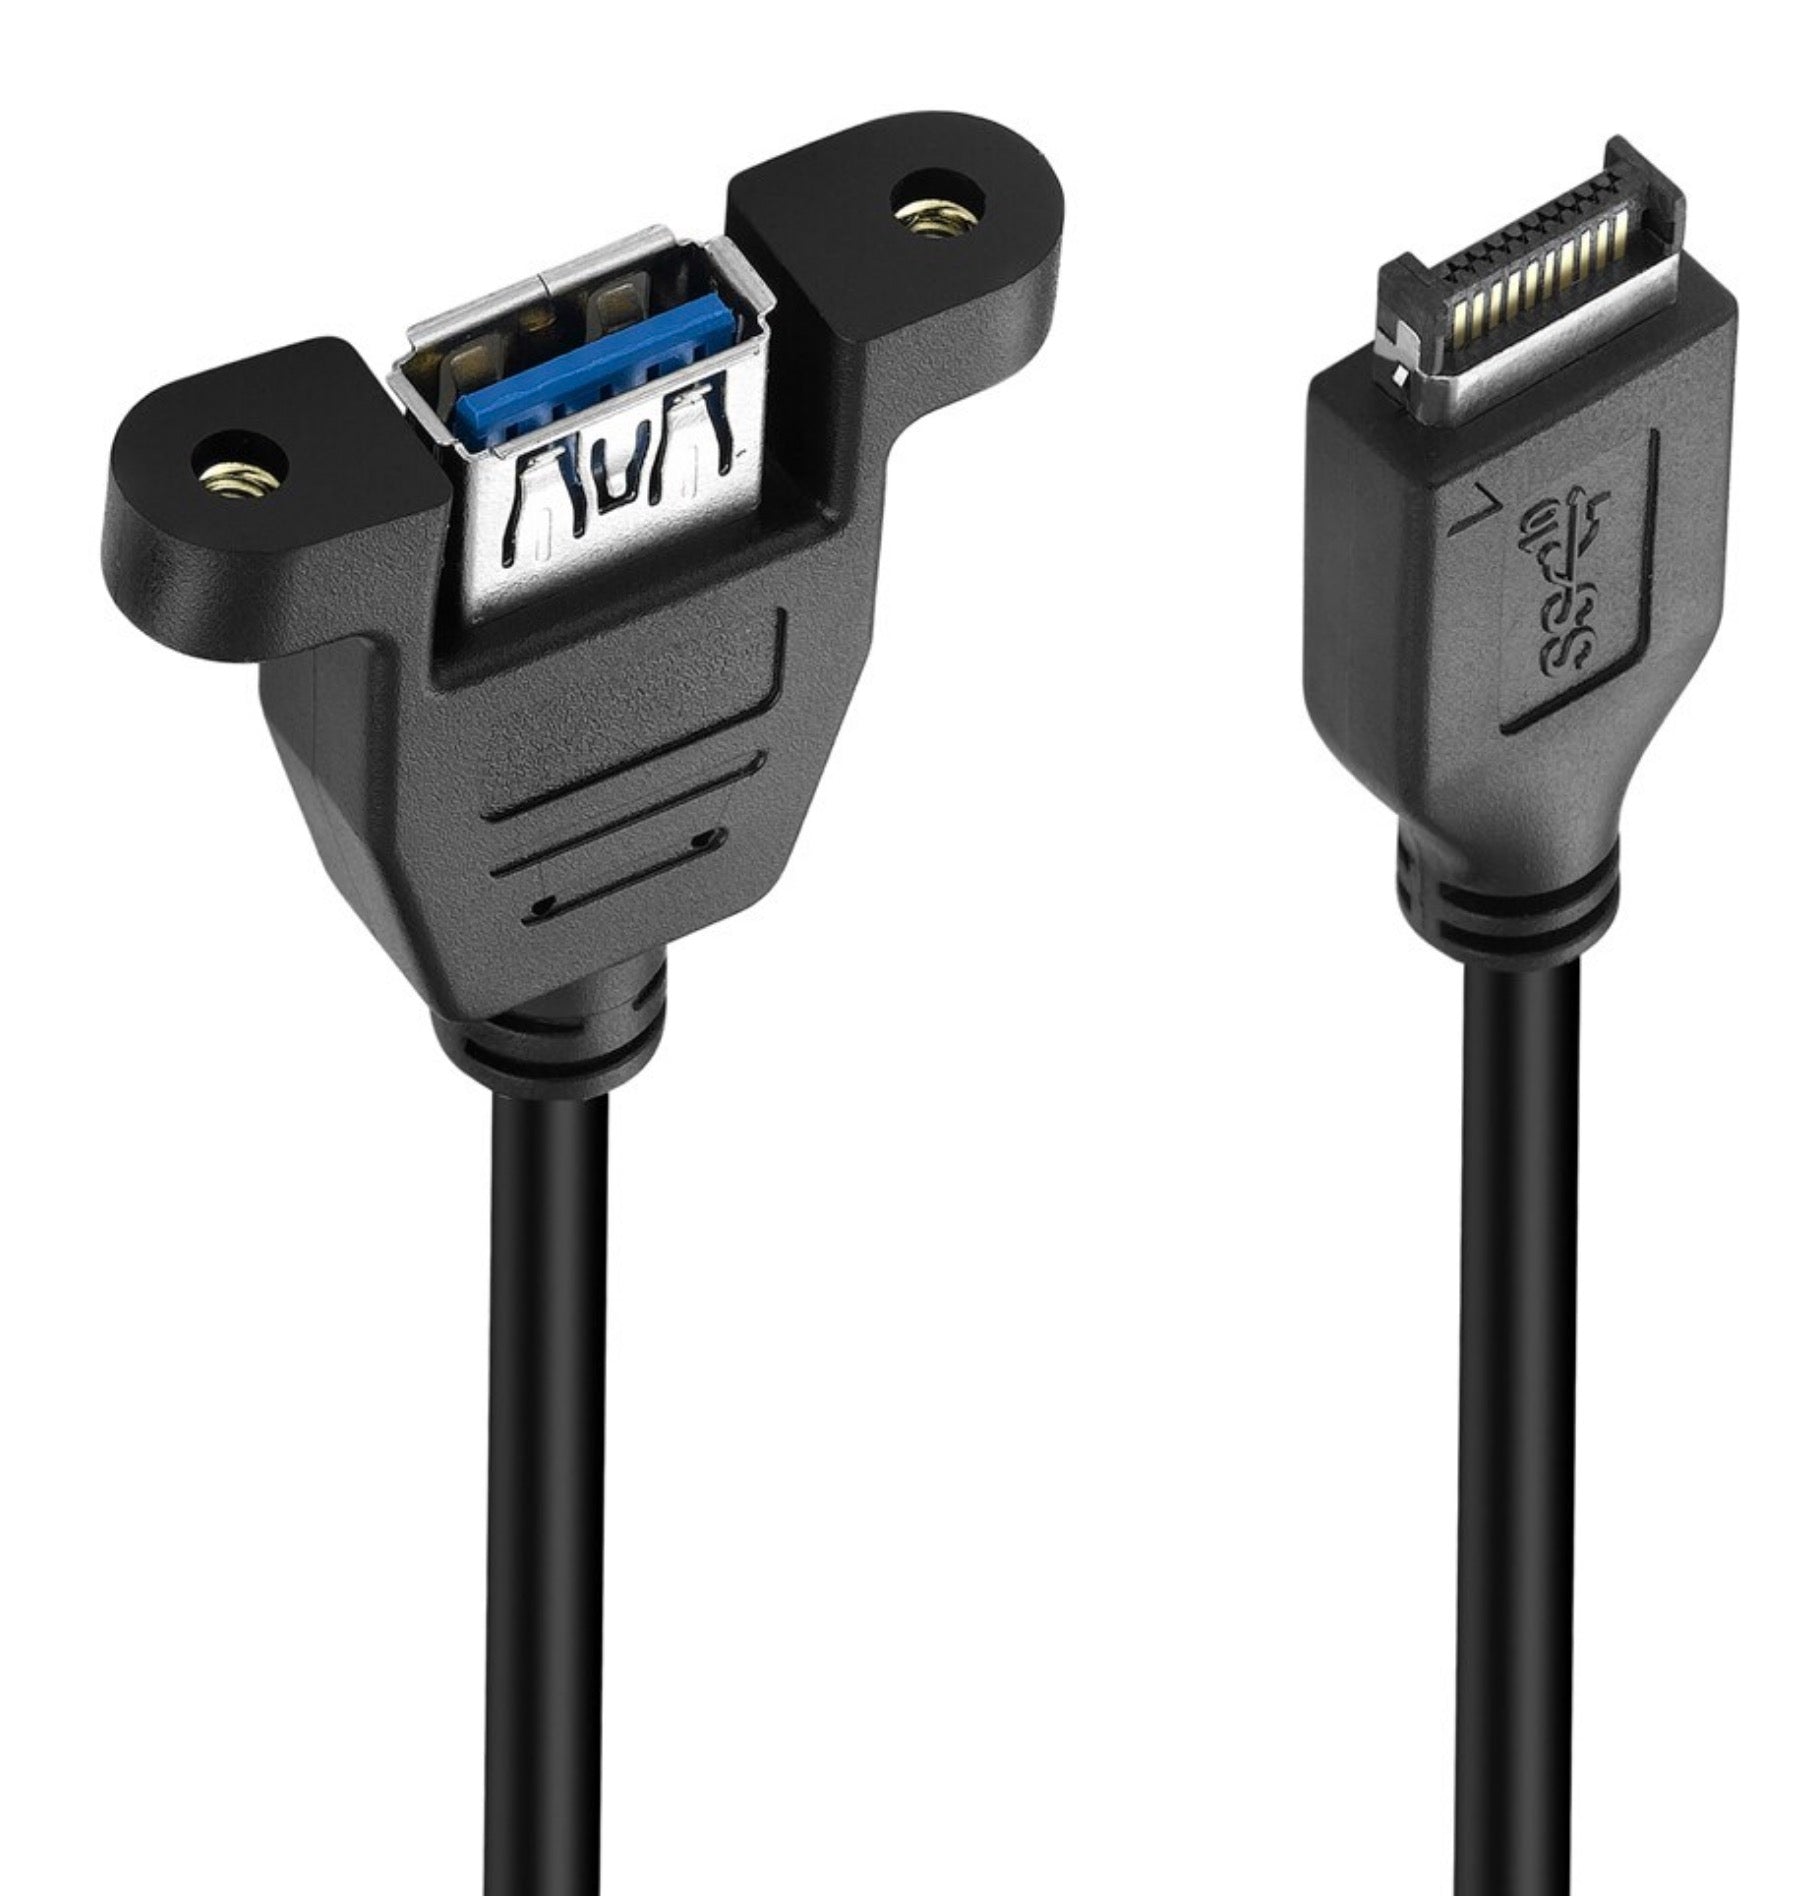 USB 3.1 Type E Gen2 to USB 3.0 Type A Panel Mount Cable 0.5m